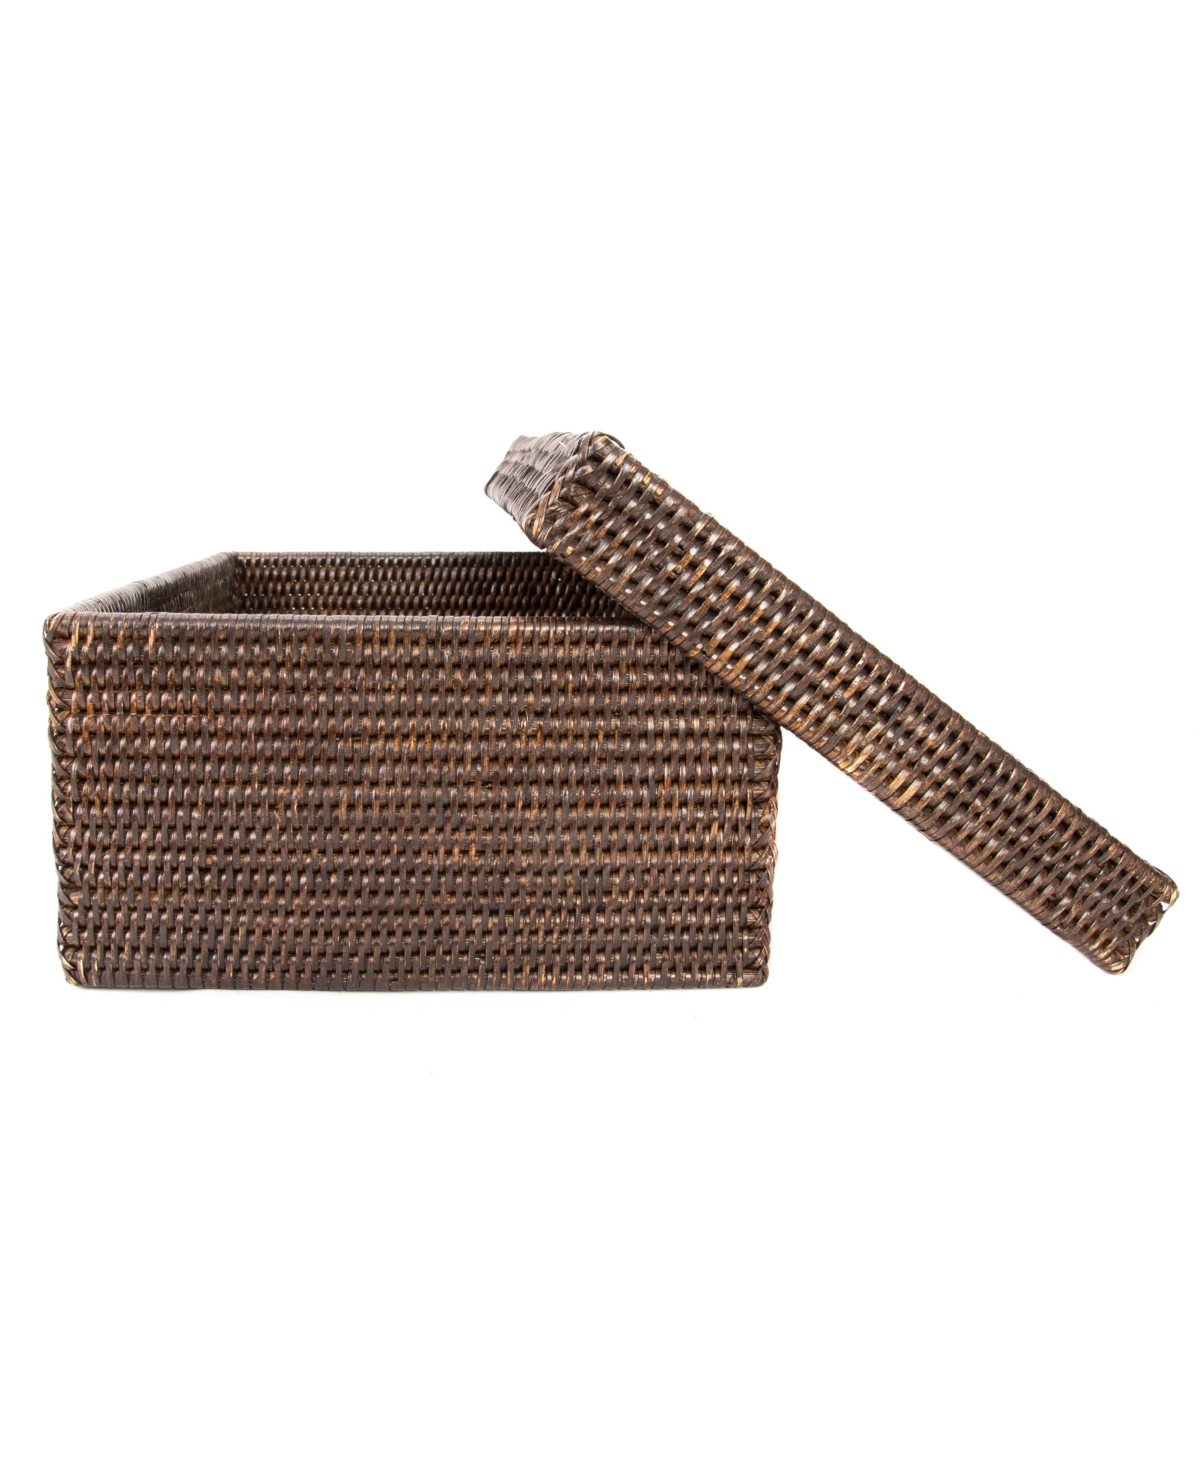 Artifacts Trading Company Artifacts Rattan Rectangular Storage Box With Lid In Coffee Bean